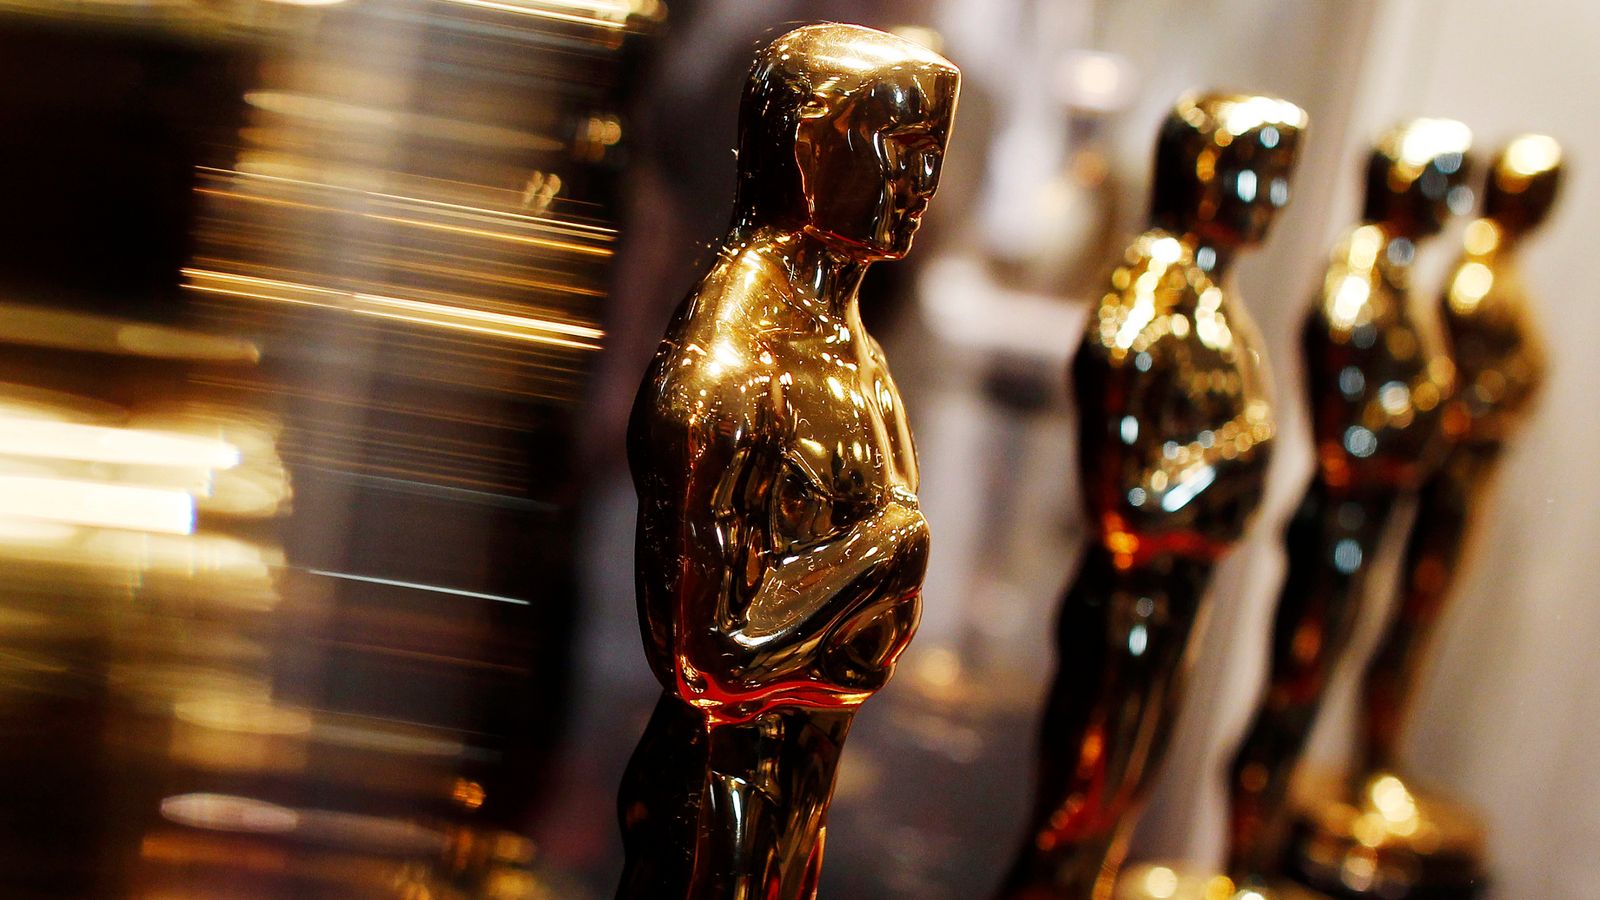 Oscars 2021: Academy moves back ceremony from February 28 to April